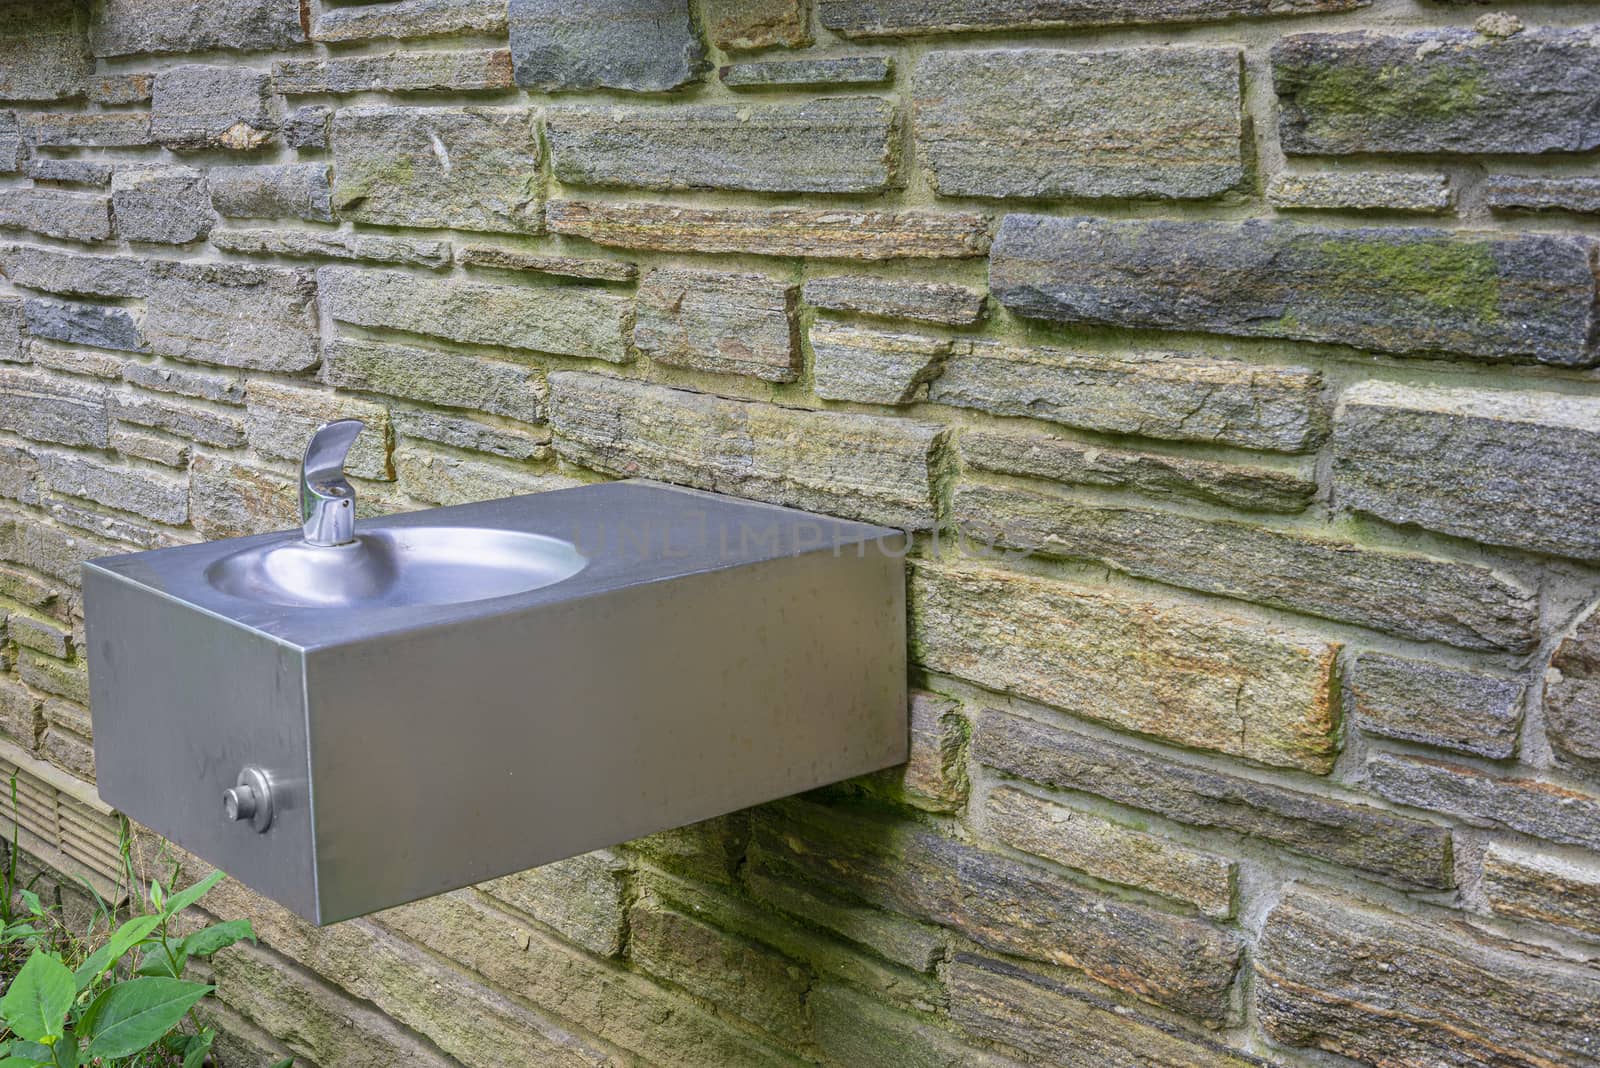 Outdoor Drinking Fountain in the Great Smoky Mountains National  by stockbuster1